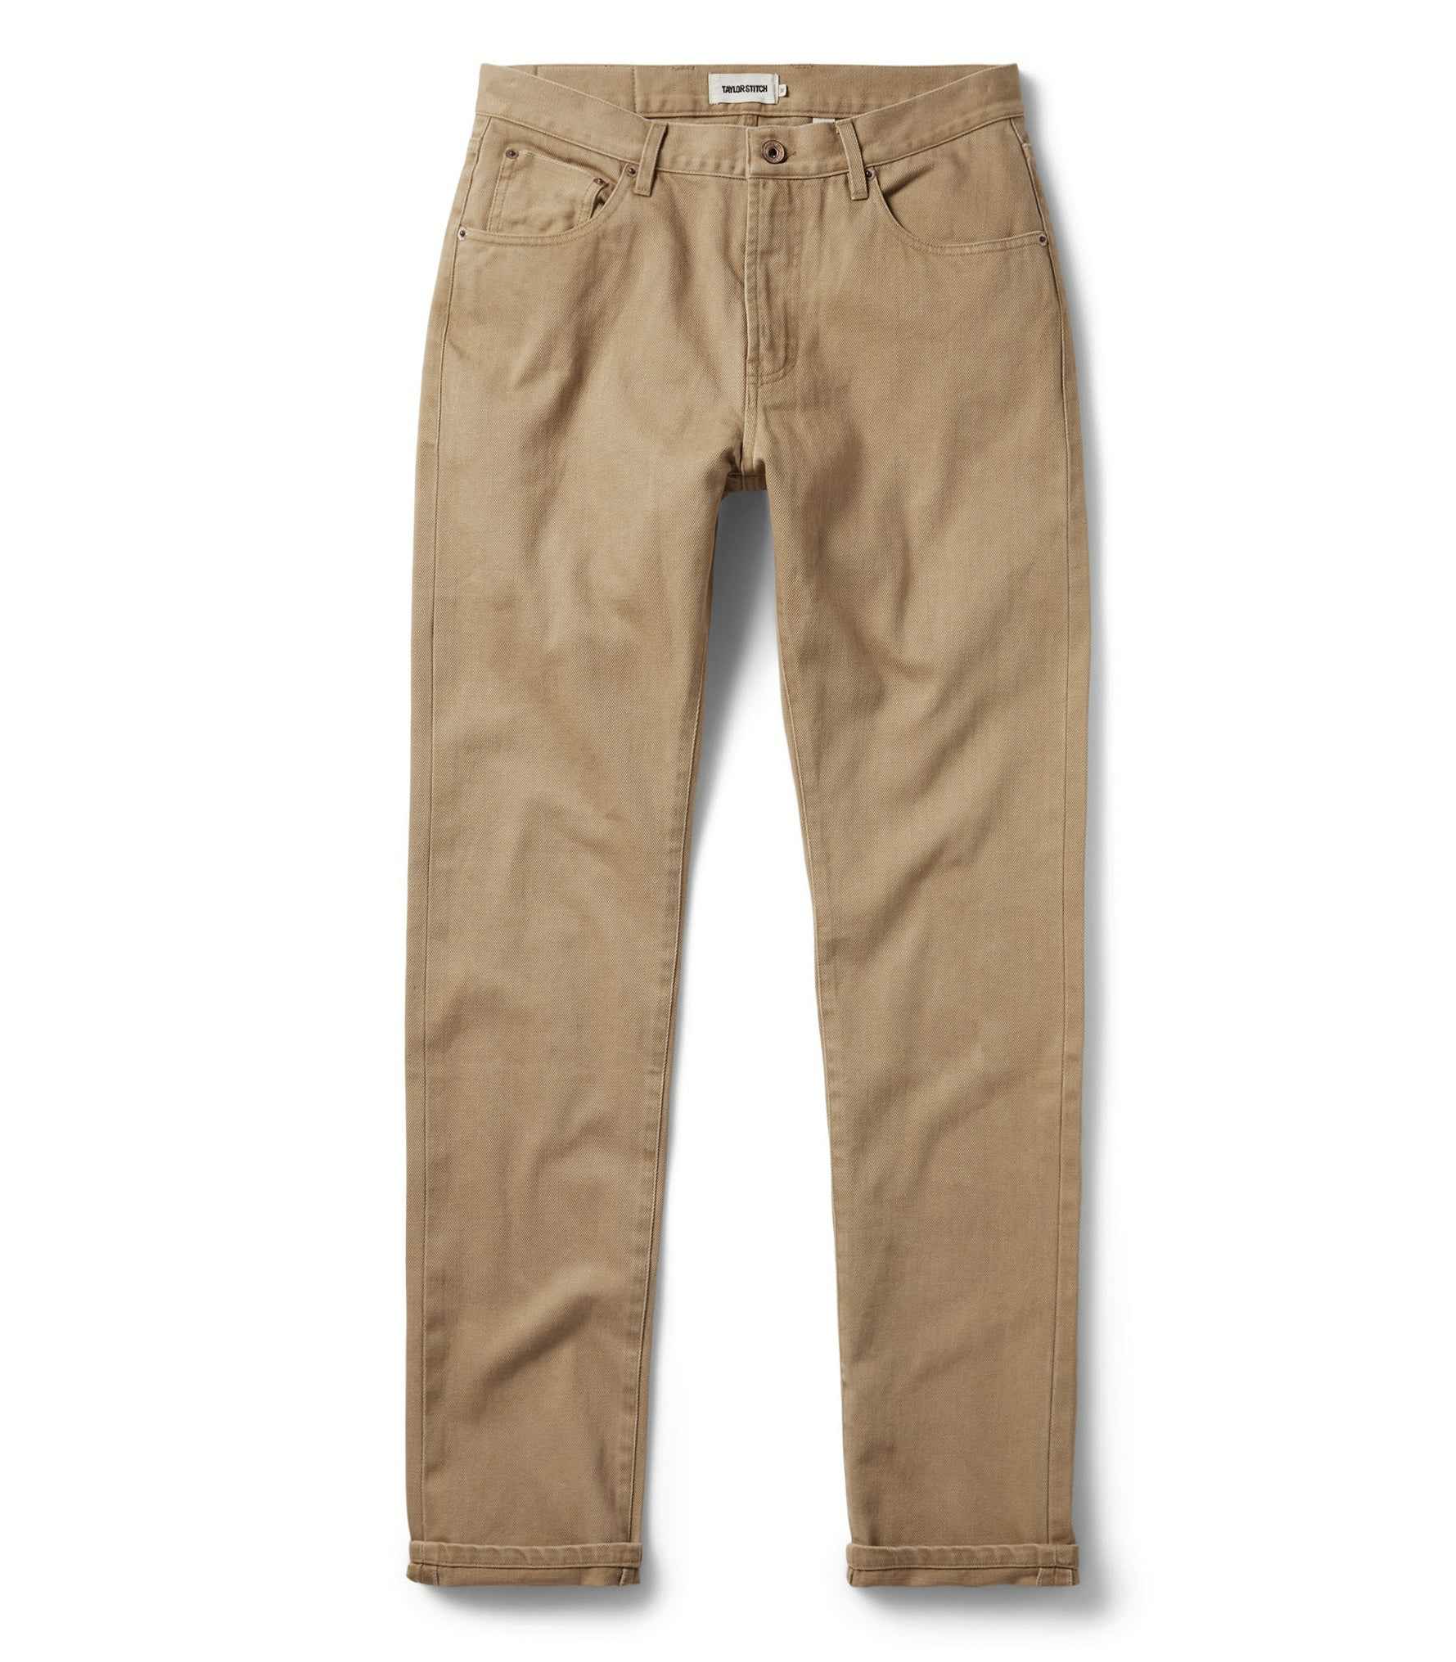 Taylor Stitch Slim All Day Pant in Washed Tobacco Selvage - Earl's ...